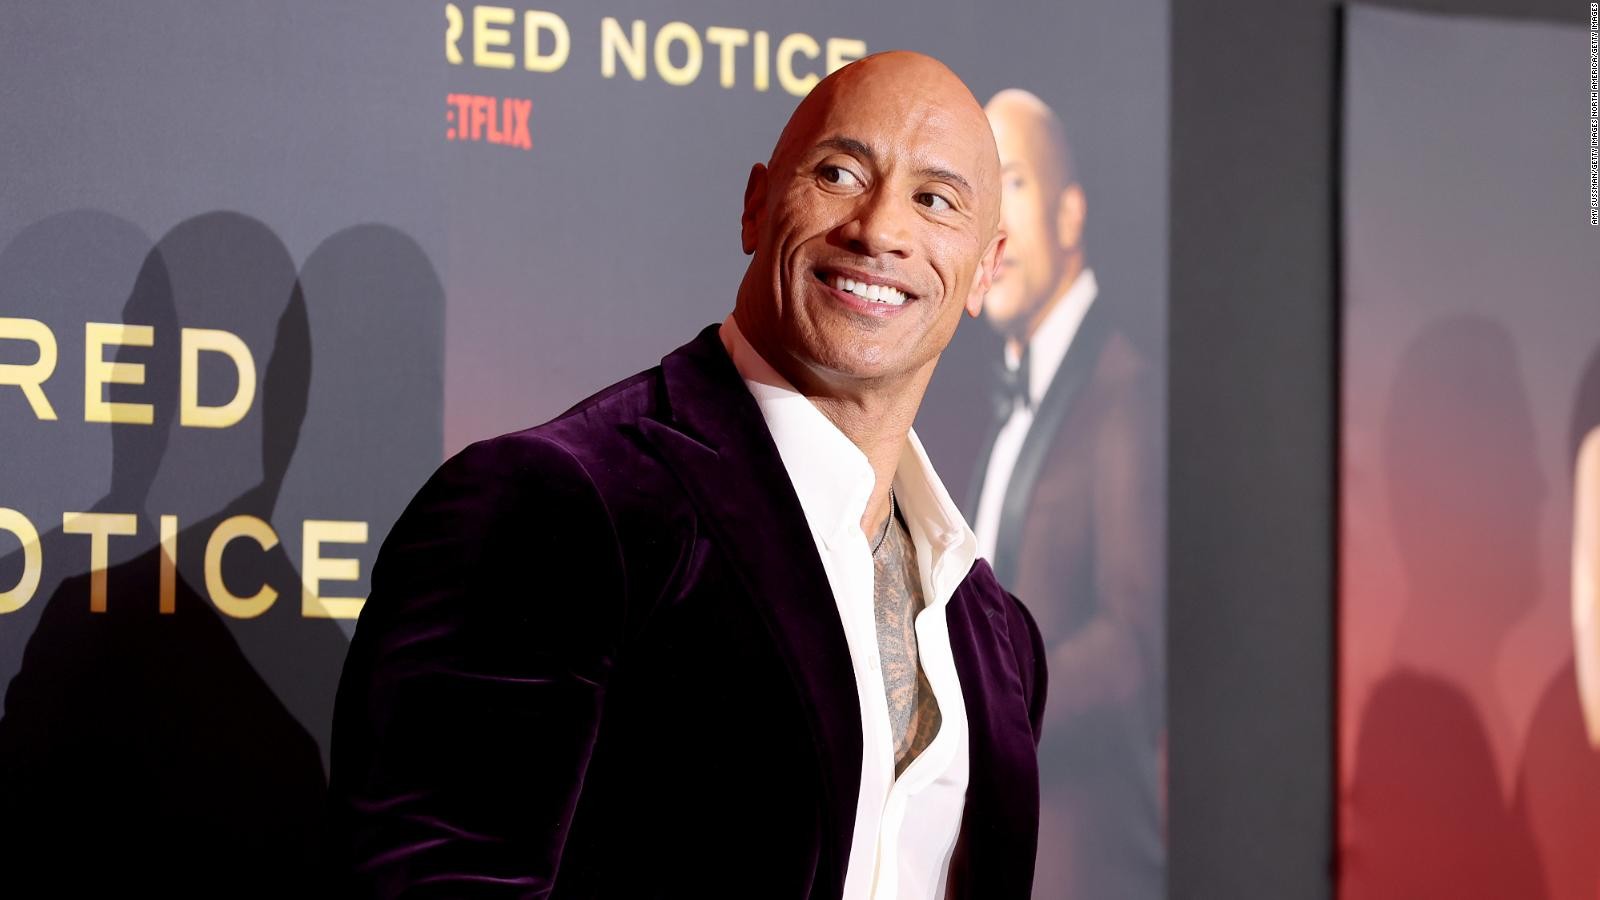 Dwayne Johnson is fighting for Henry Cavill's further involvement.